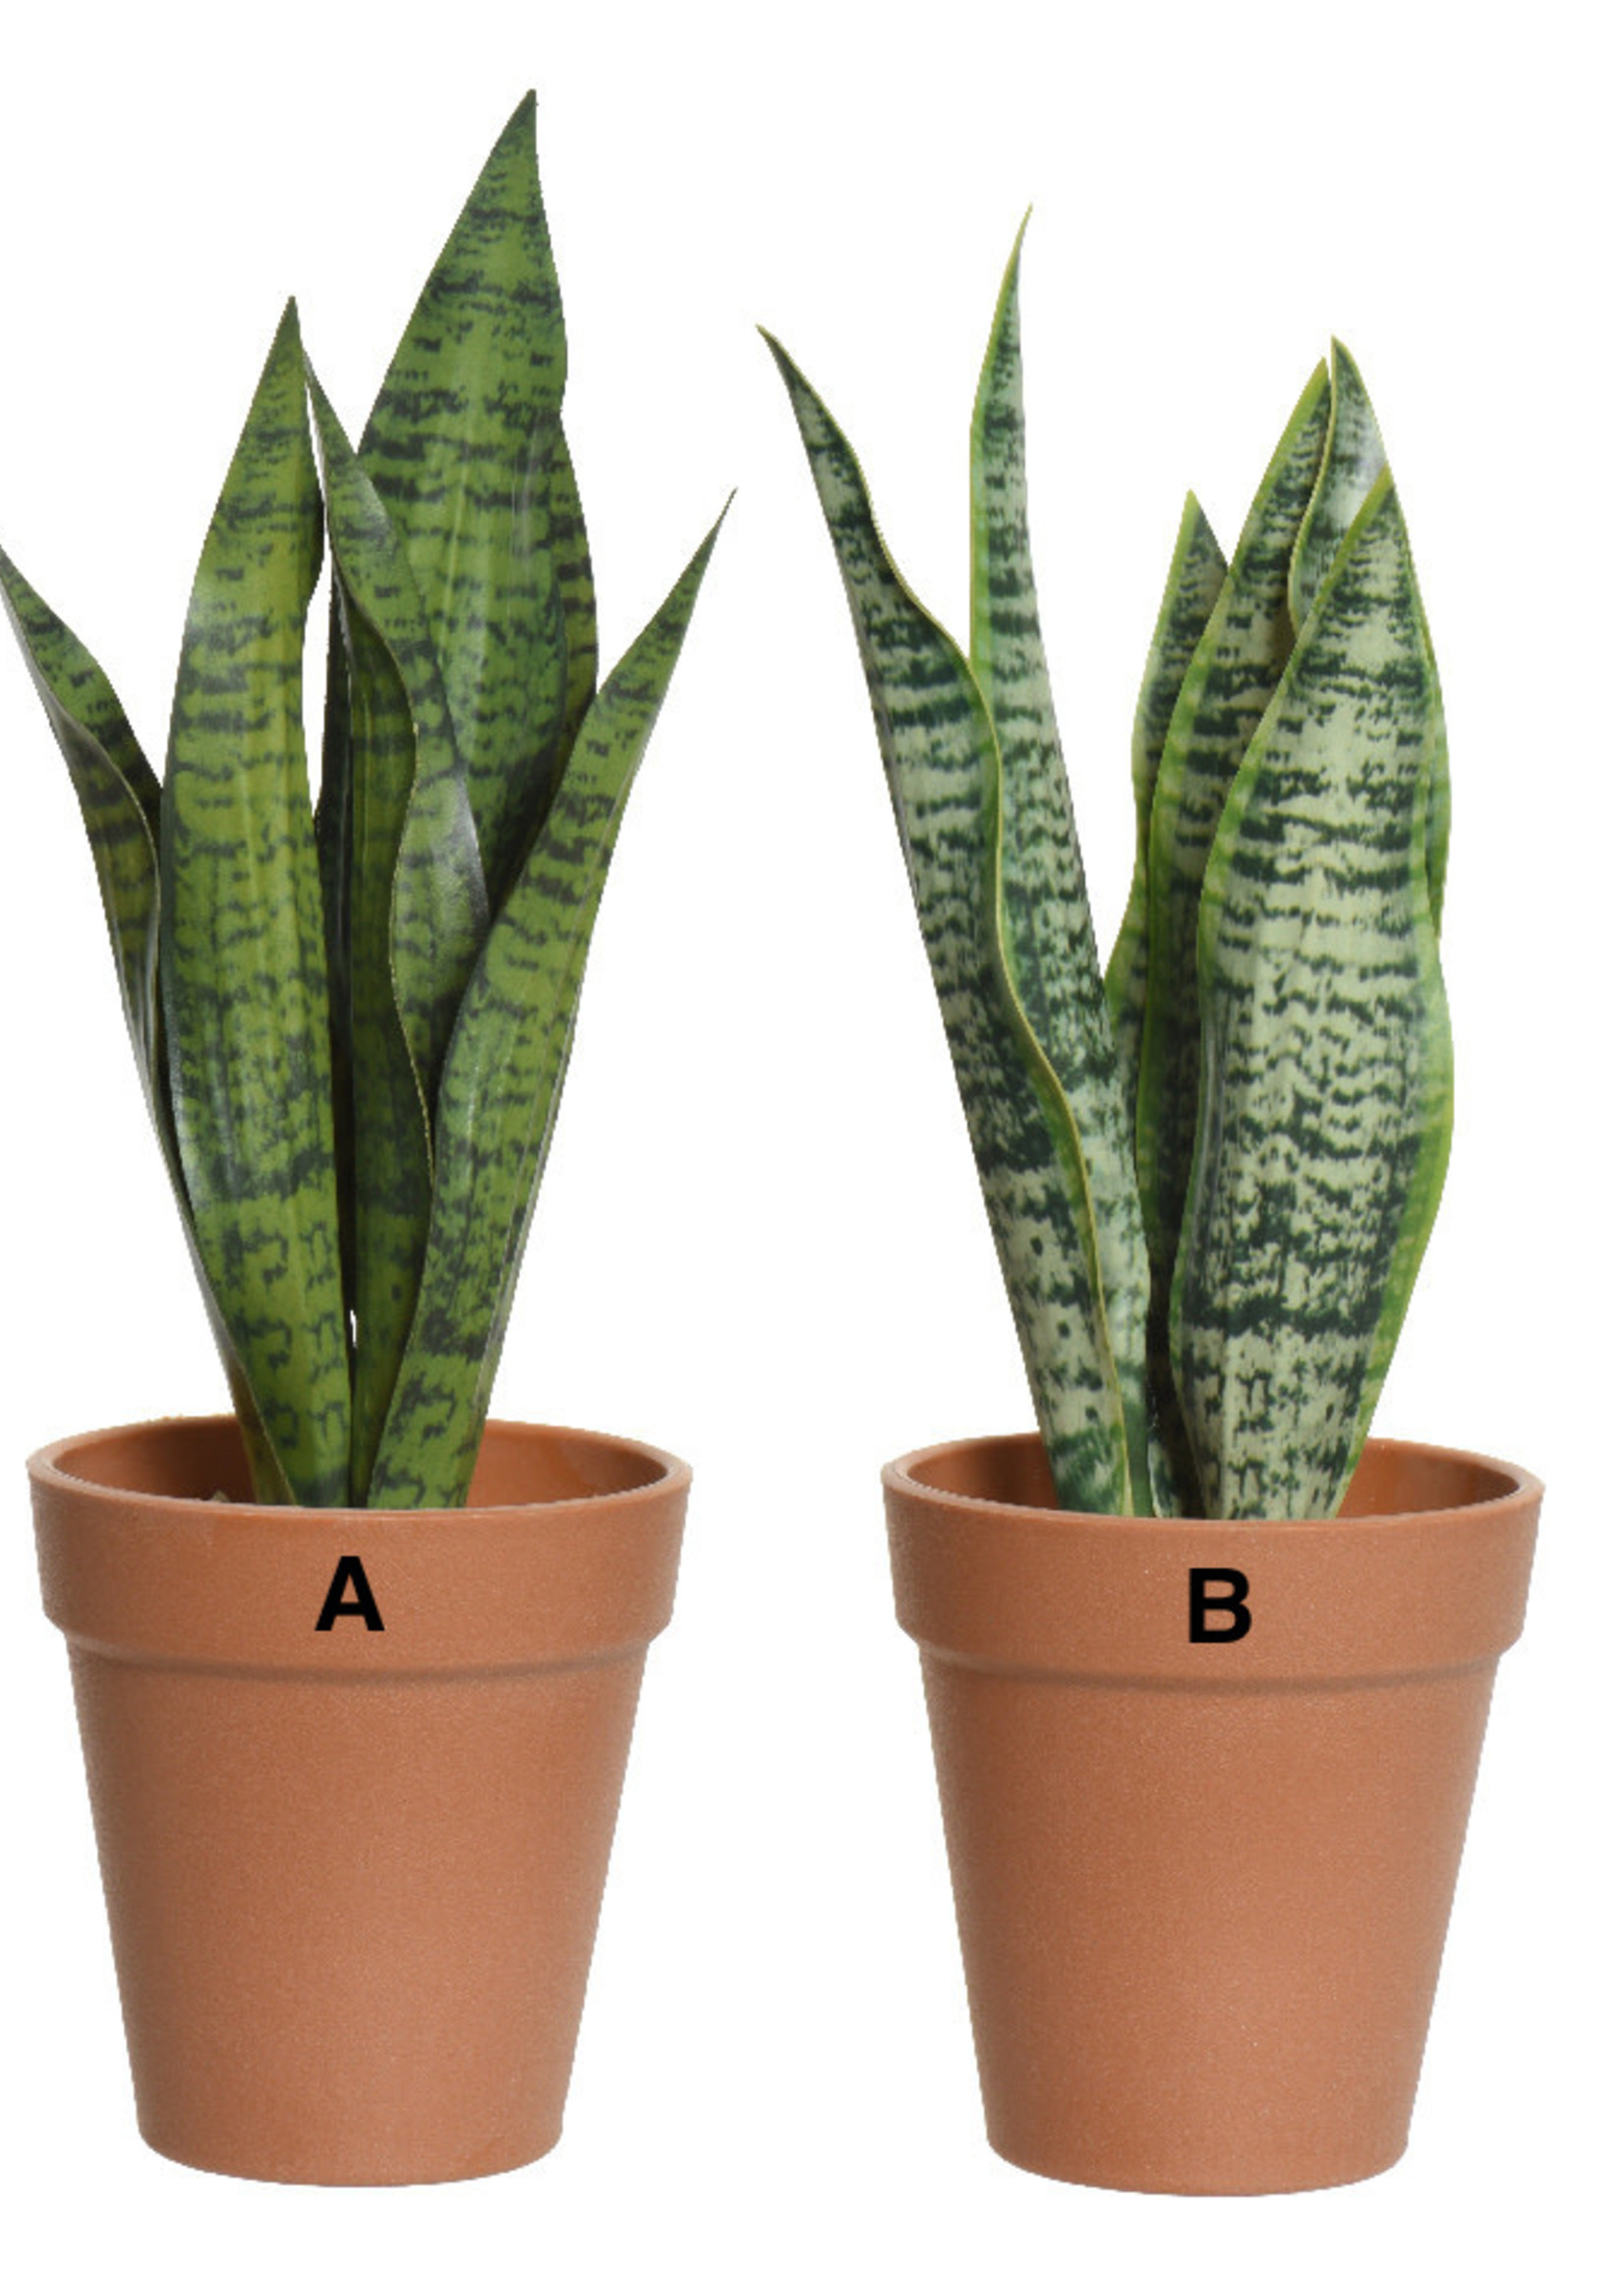 Everlands Artificial Sansevieria Plant in a Pot 28 x 13cm - two styles